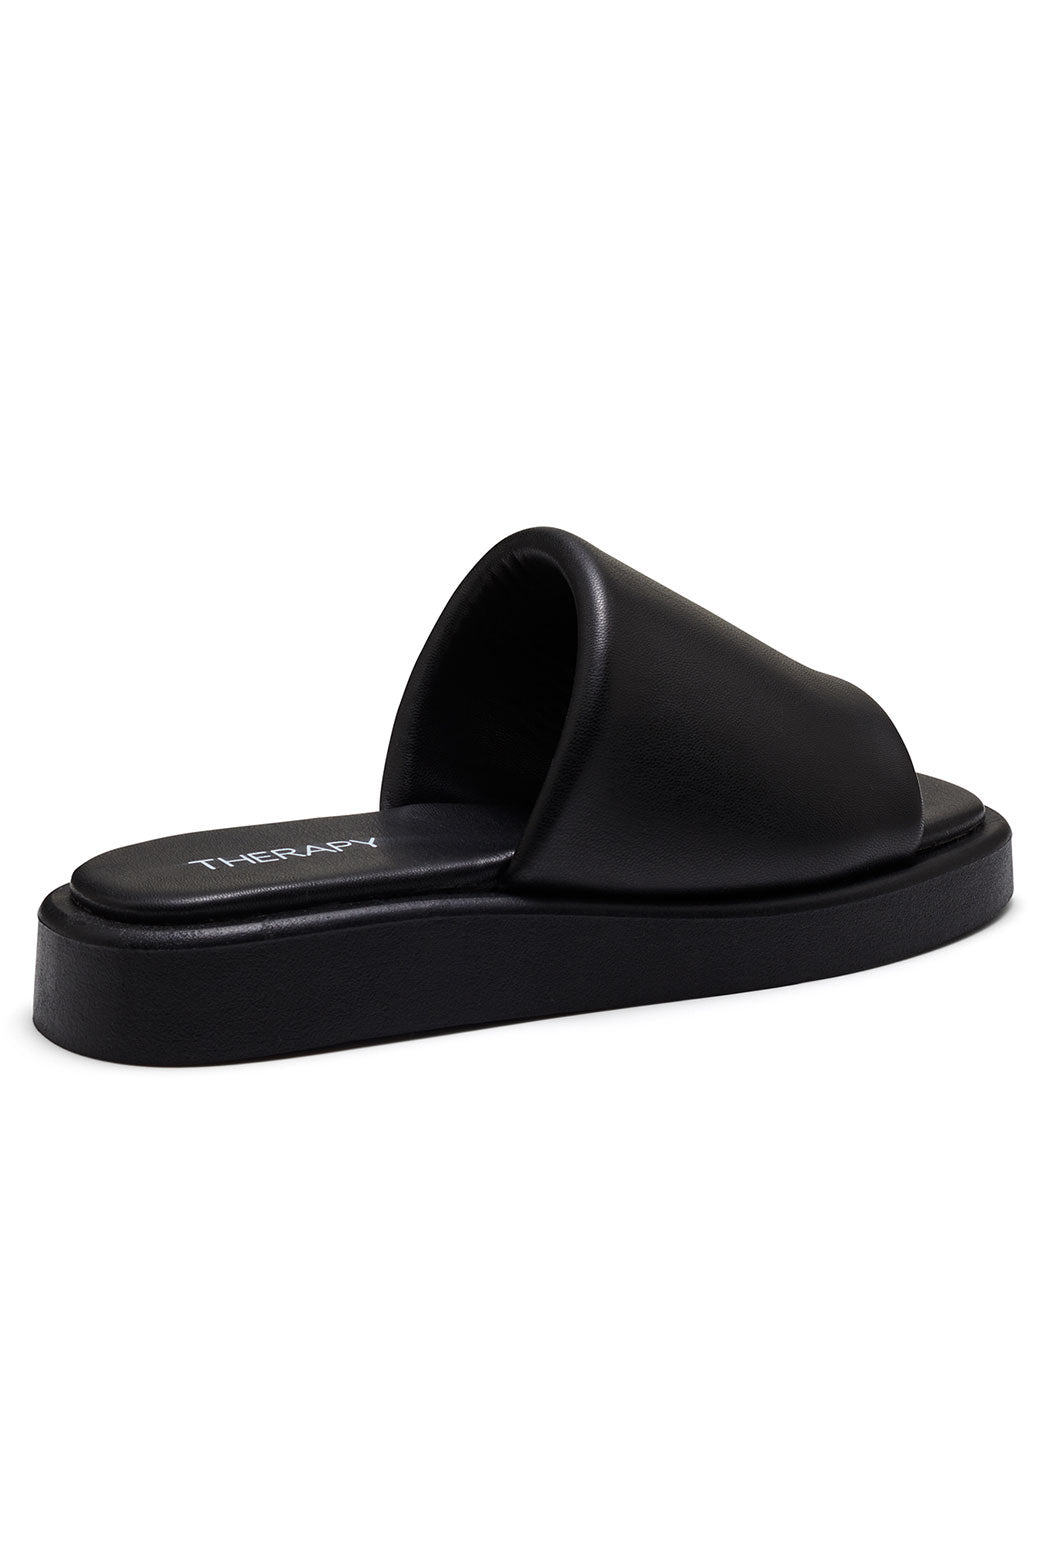 FINAL SALE Therapy Puffy Slides Black